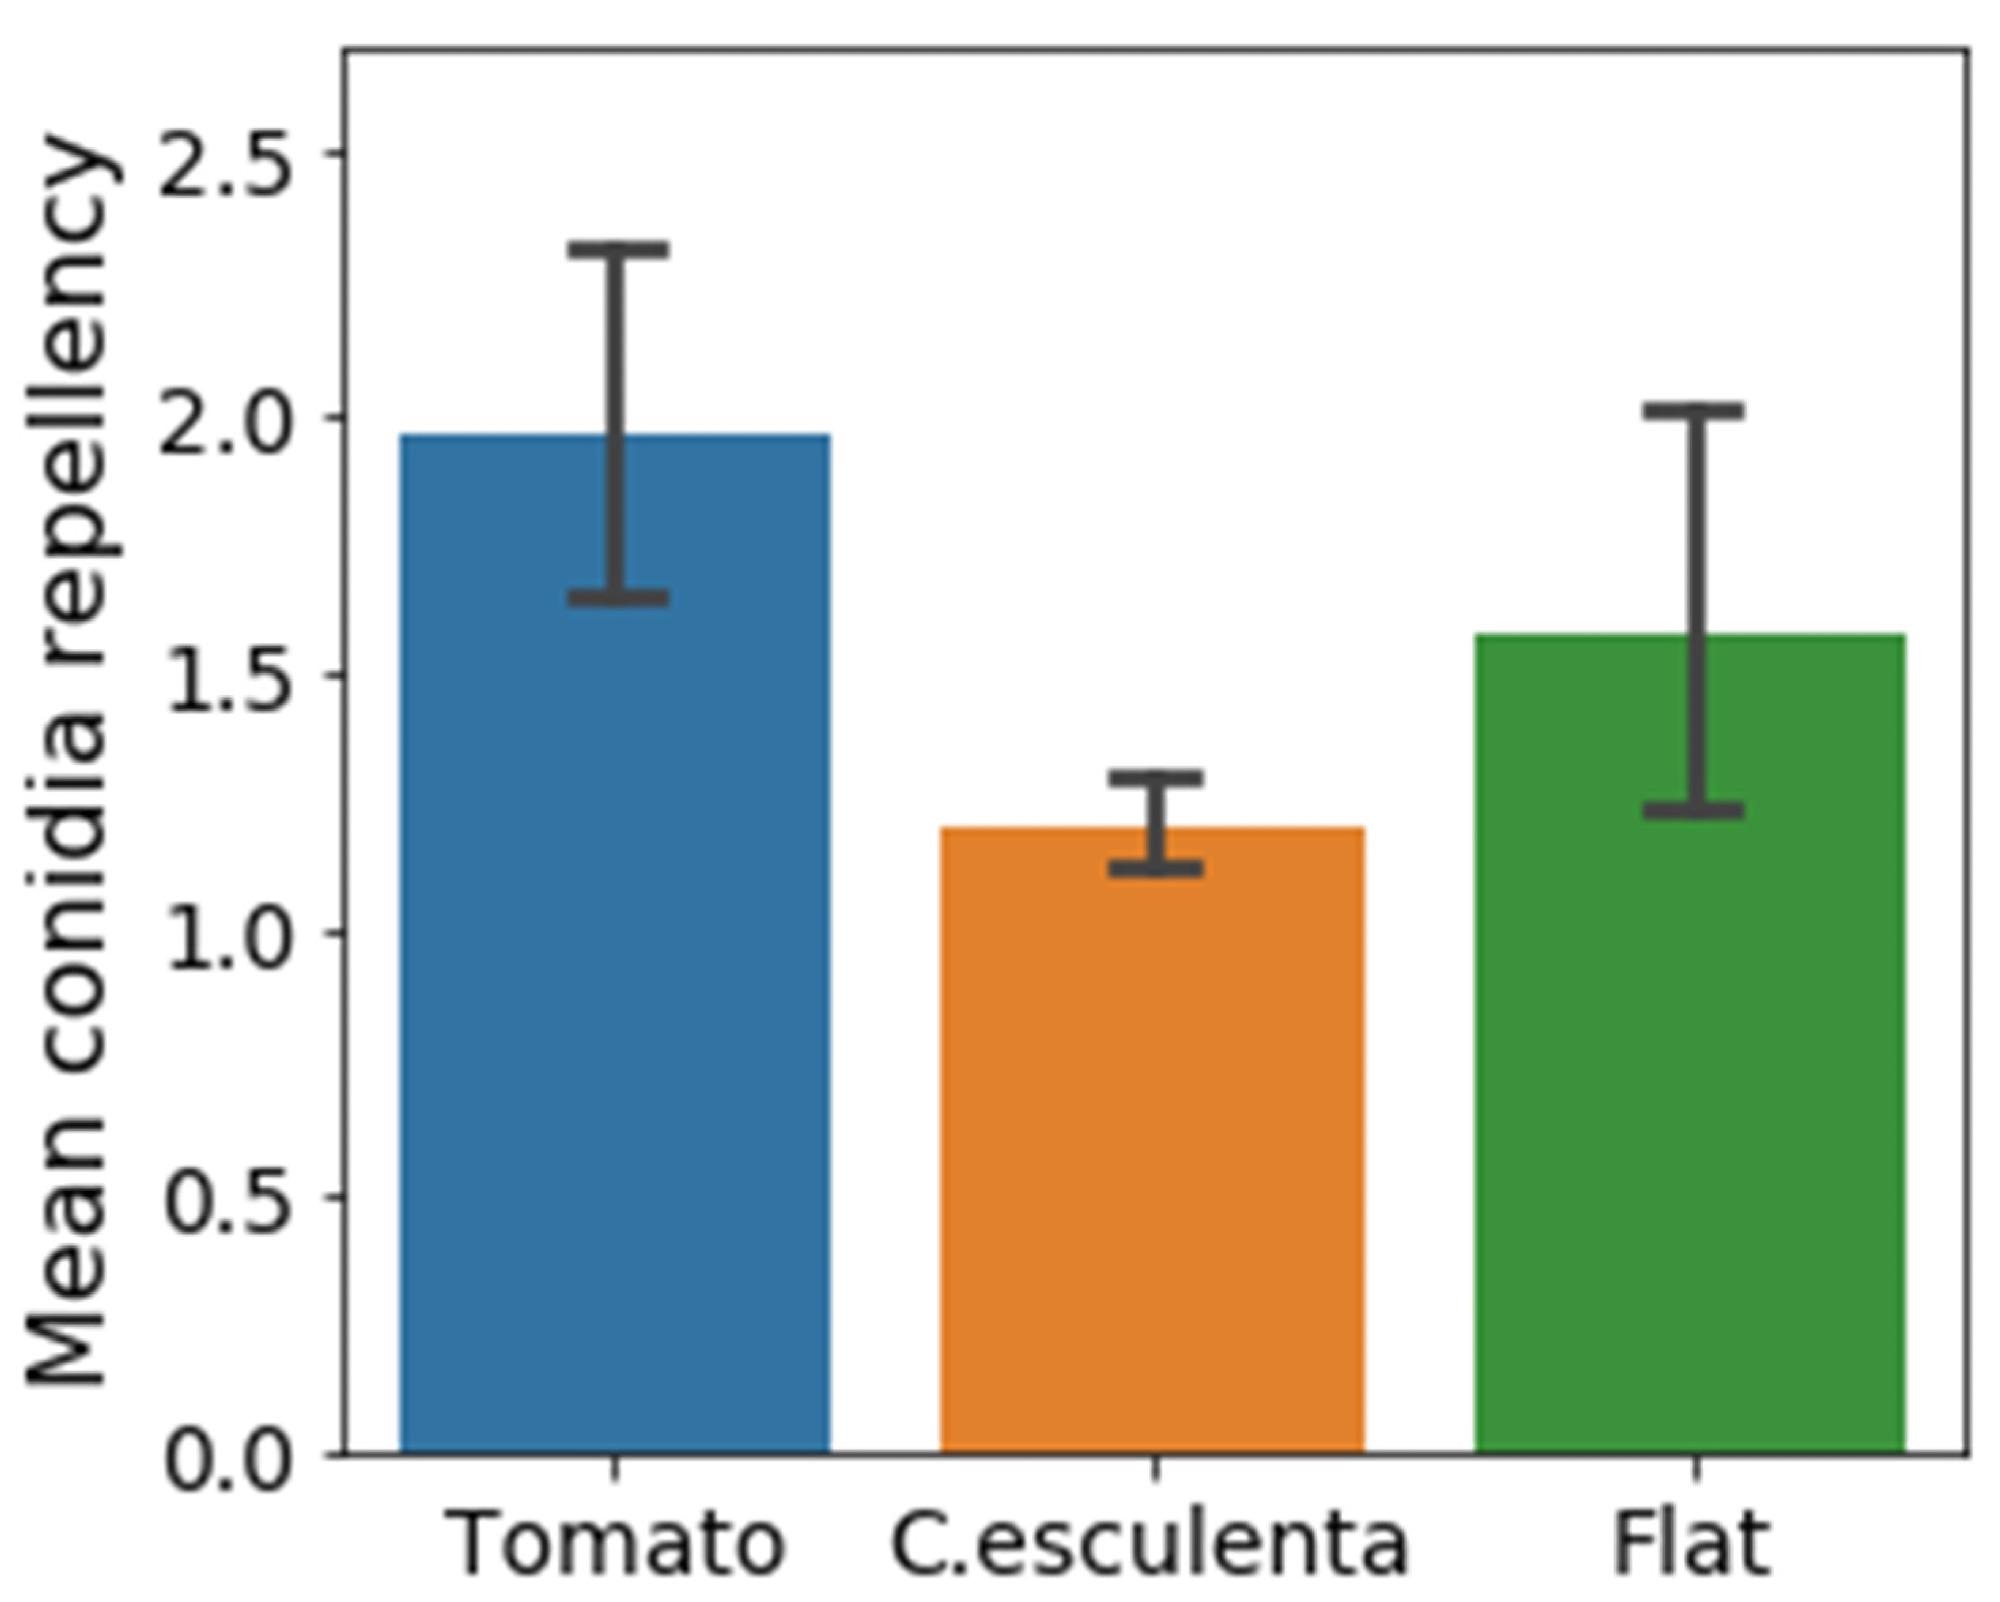 Conidia repellency ability of synthetic surfaces. Conidia repellency values of three PDMS surfaces: C. esculenta and tomato leaf replicas (orange and blue respectively) and flat surface (green) as a control for a structure less surface with the same chemical properties. Pairs comparison was conducted using Student’s t-test, a was adjusted using Bonferroni correction. The microstructure of tomato leaves seemed to induce significantly higher conidia repellency values (1.9 ± 0.18) than the texture of C. esculenta leaves (1.2 ± 0.05) (p < 0.01).